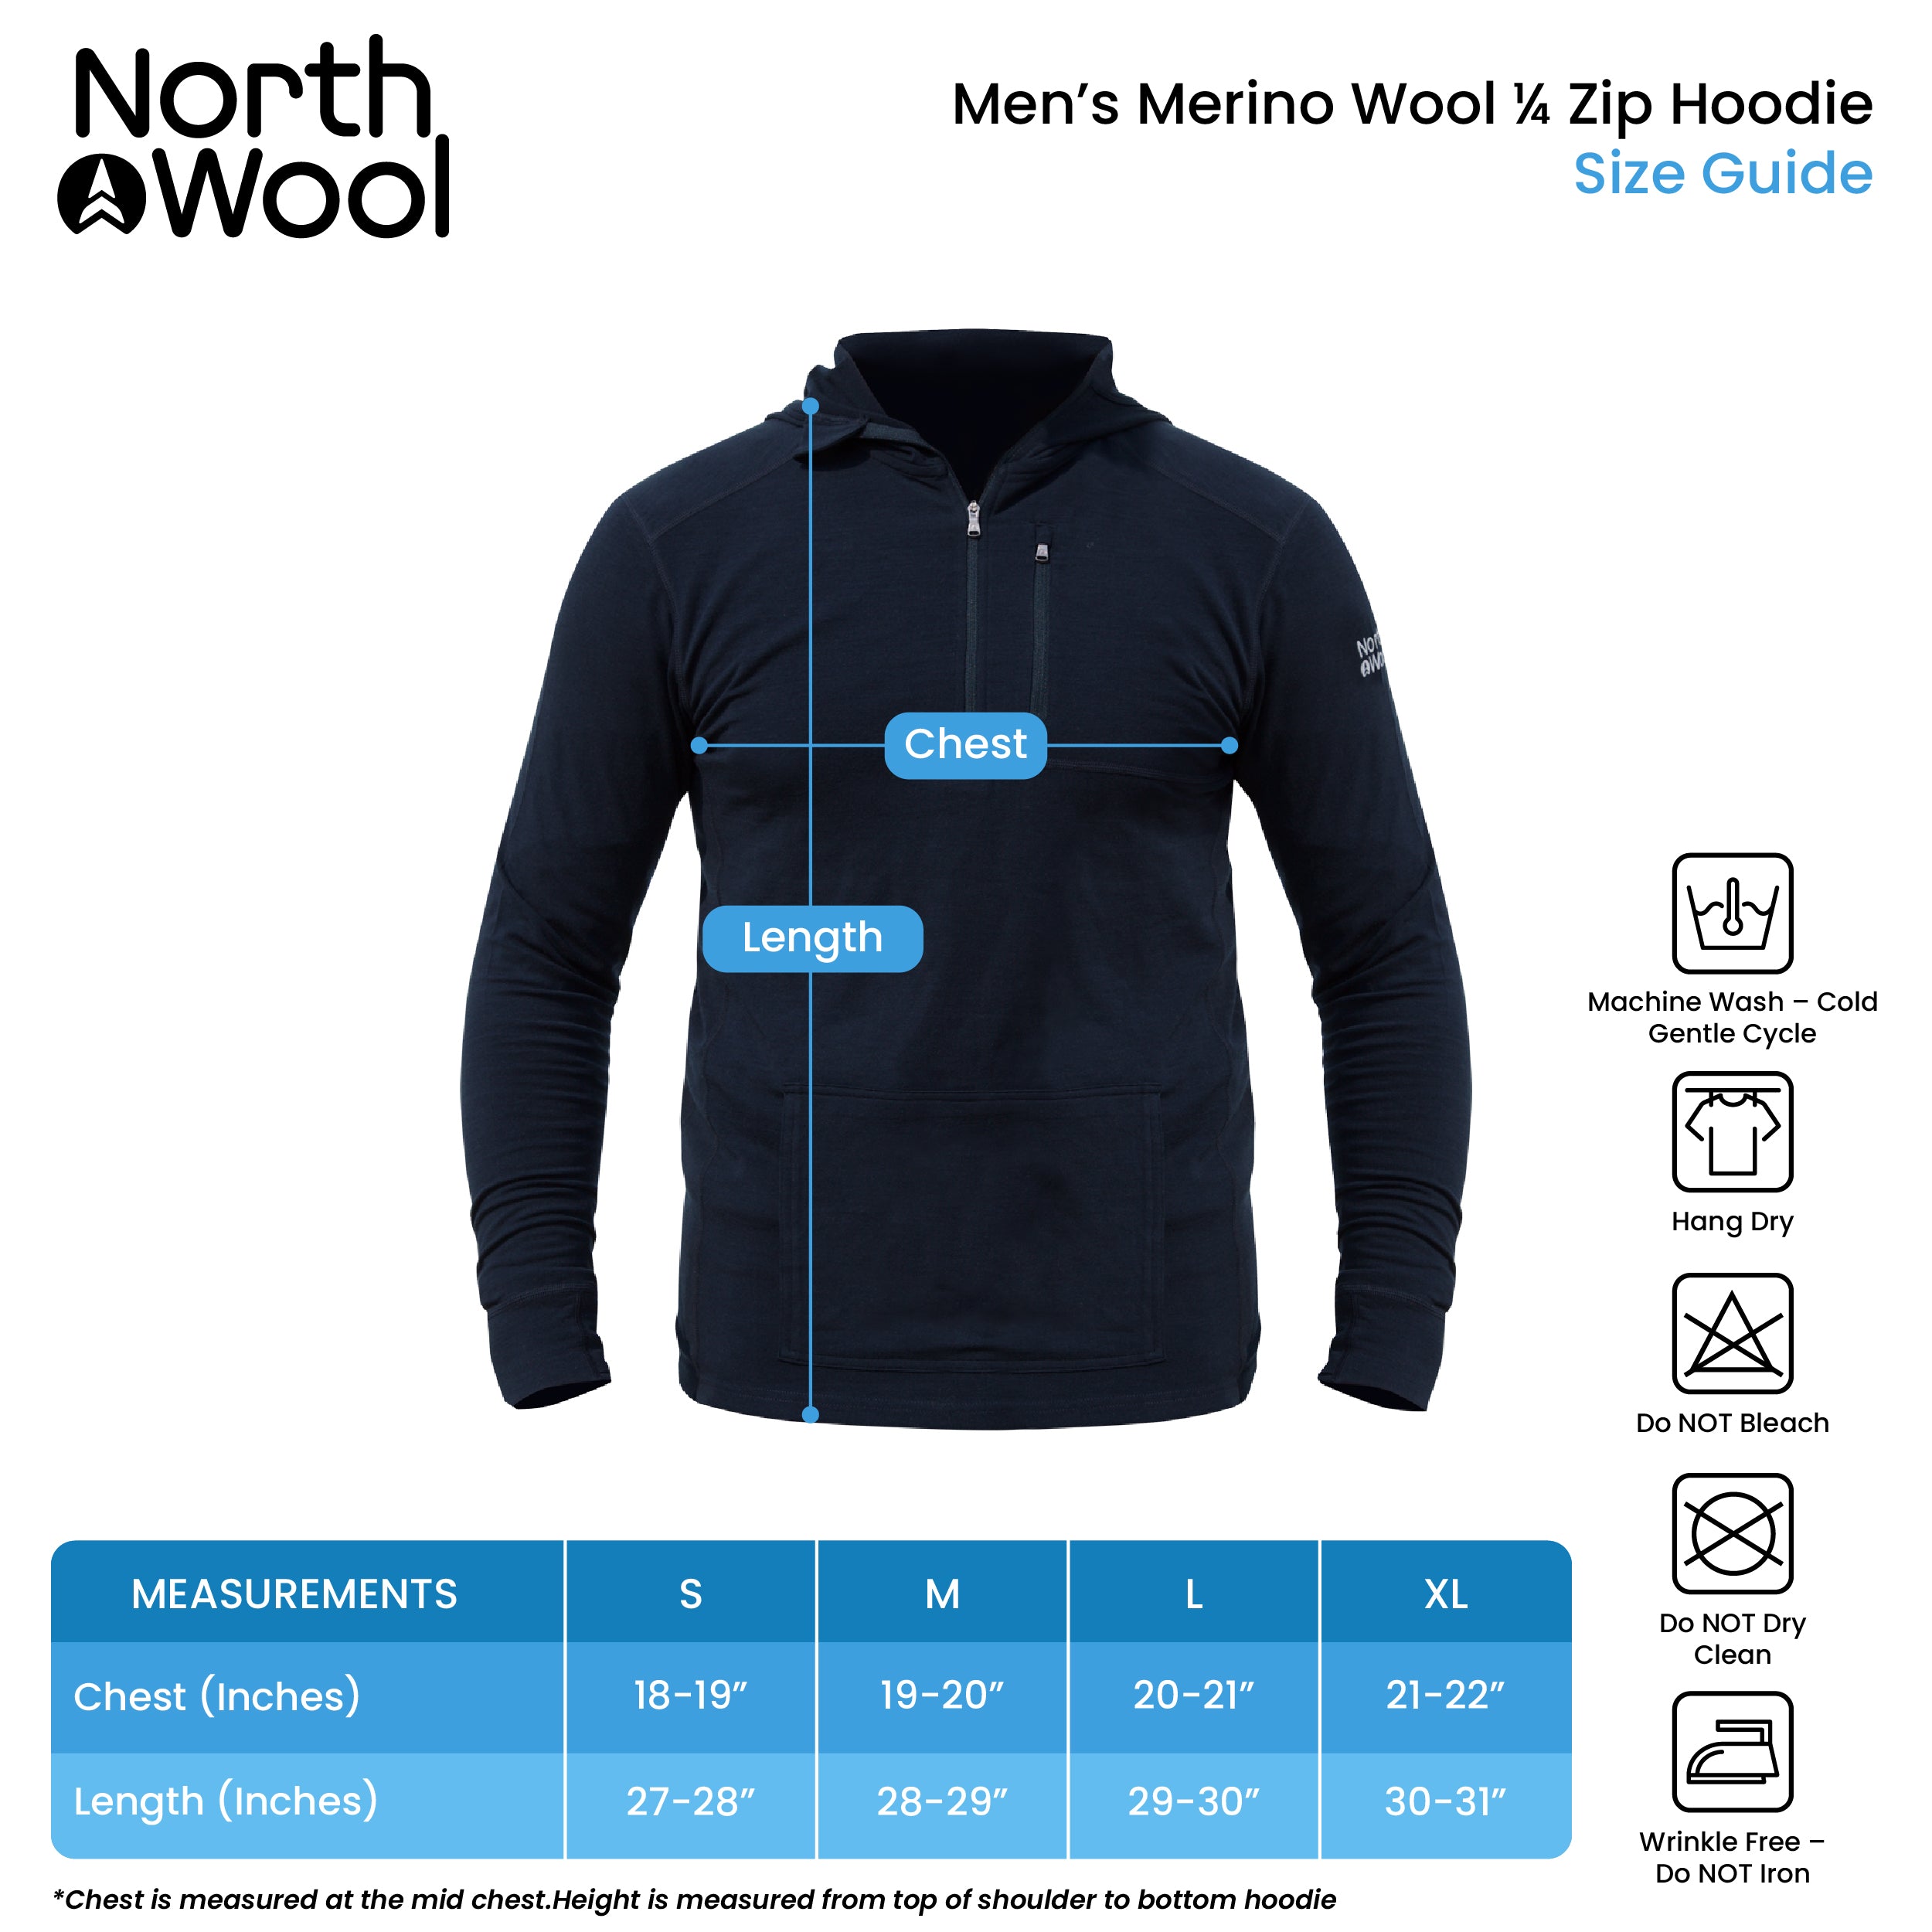 NorthWool Men's Merino Wool 1/4 Zip Midlayer Hoodie with Pouch and Pocket 260 GSM